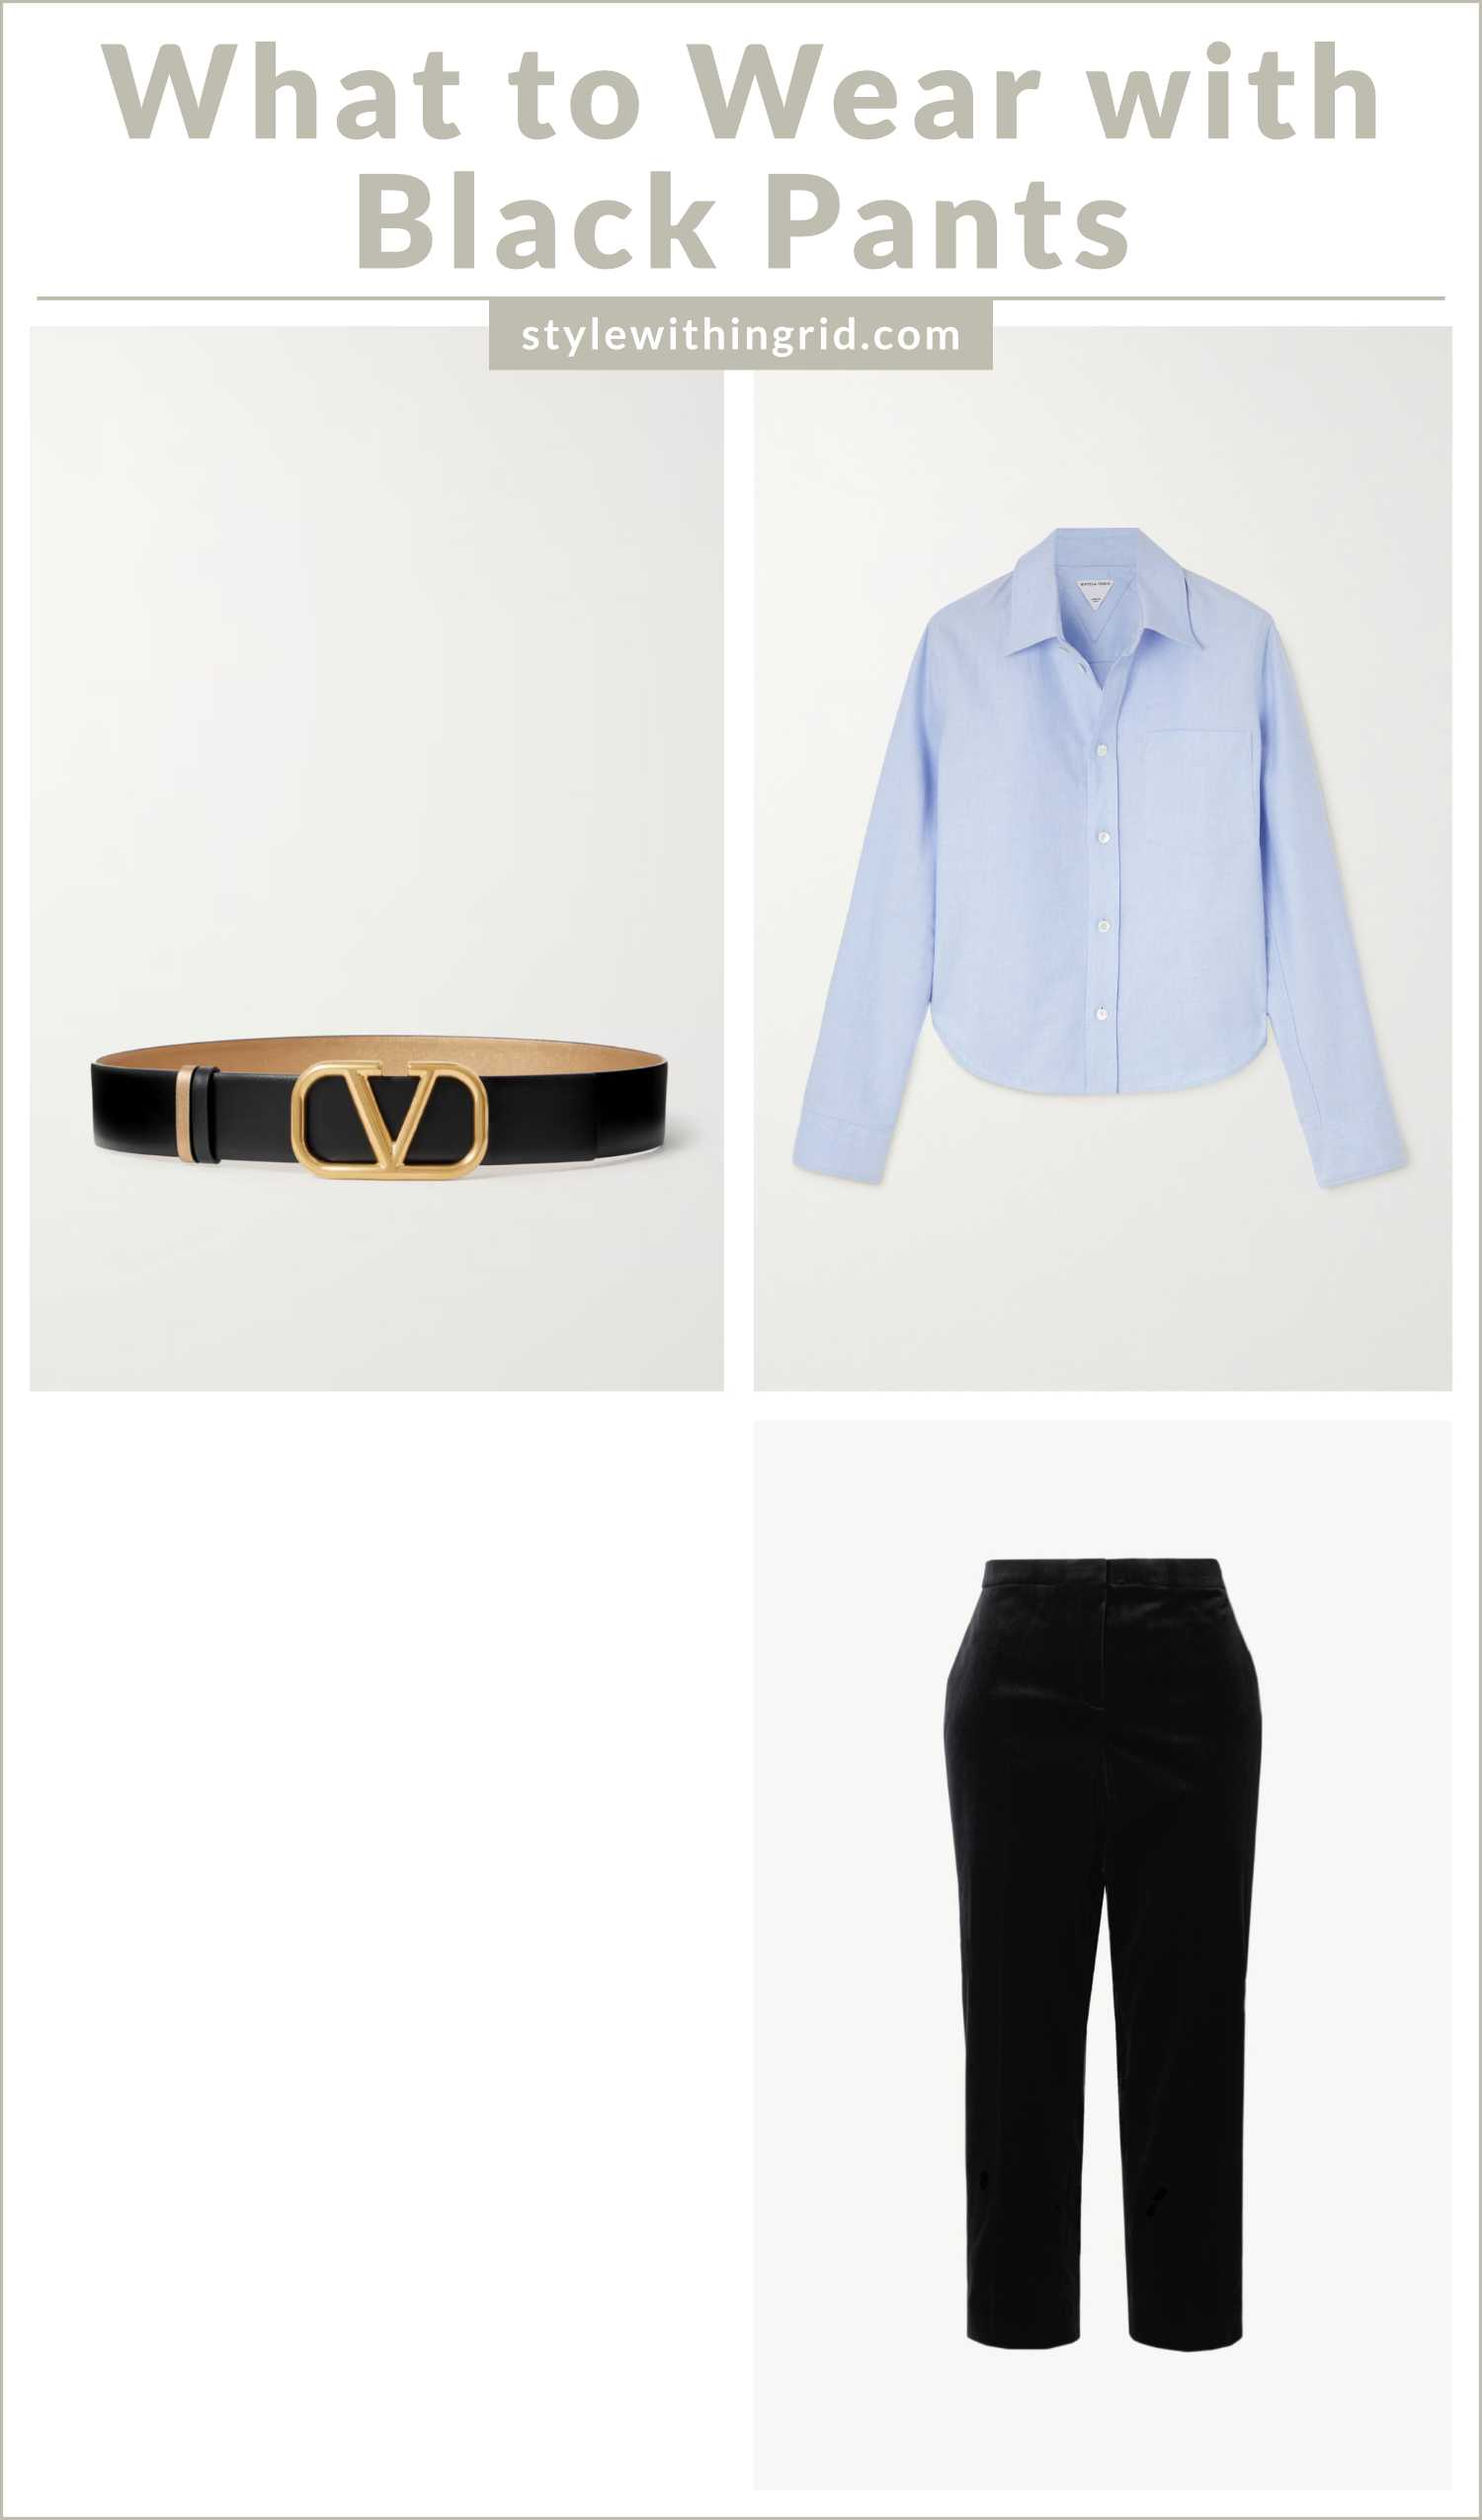 5 OUTFITS IDEAS TO STYLE A SMALL DESIGNER BELT * VALENTINO * GUCCI * CASUAL  & PROFESSIONAL LOOKS 